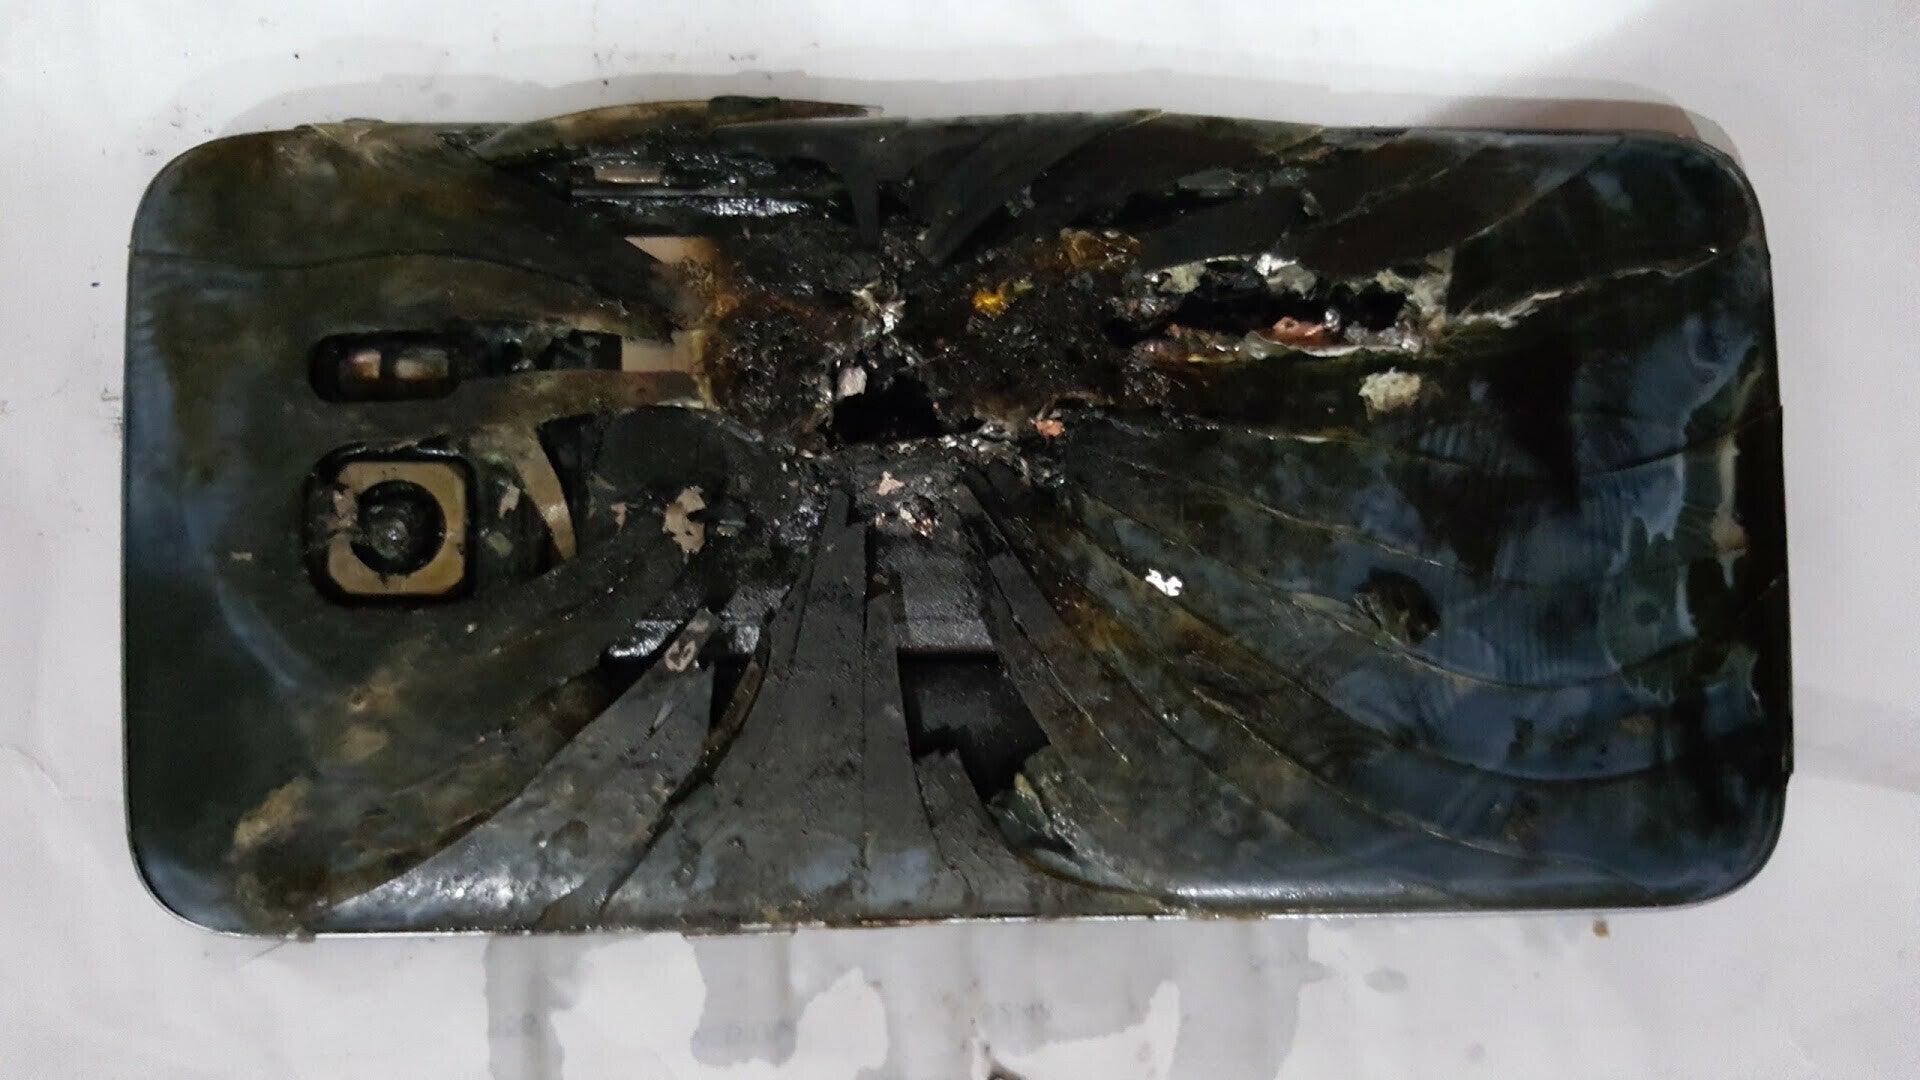 This Galaxy S7 Edge caught on fire while its owner was driving home from work - What&#039;s up with Samsung phones catching on fire?